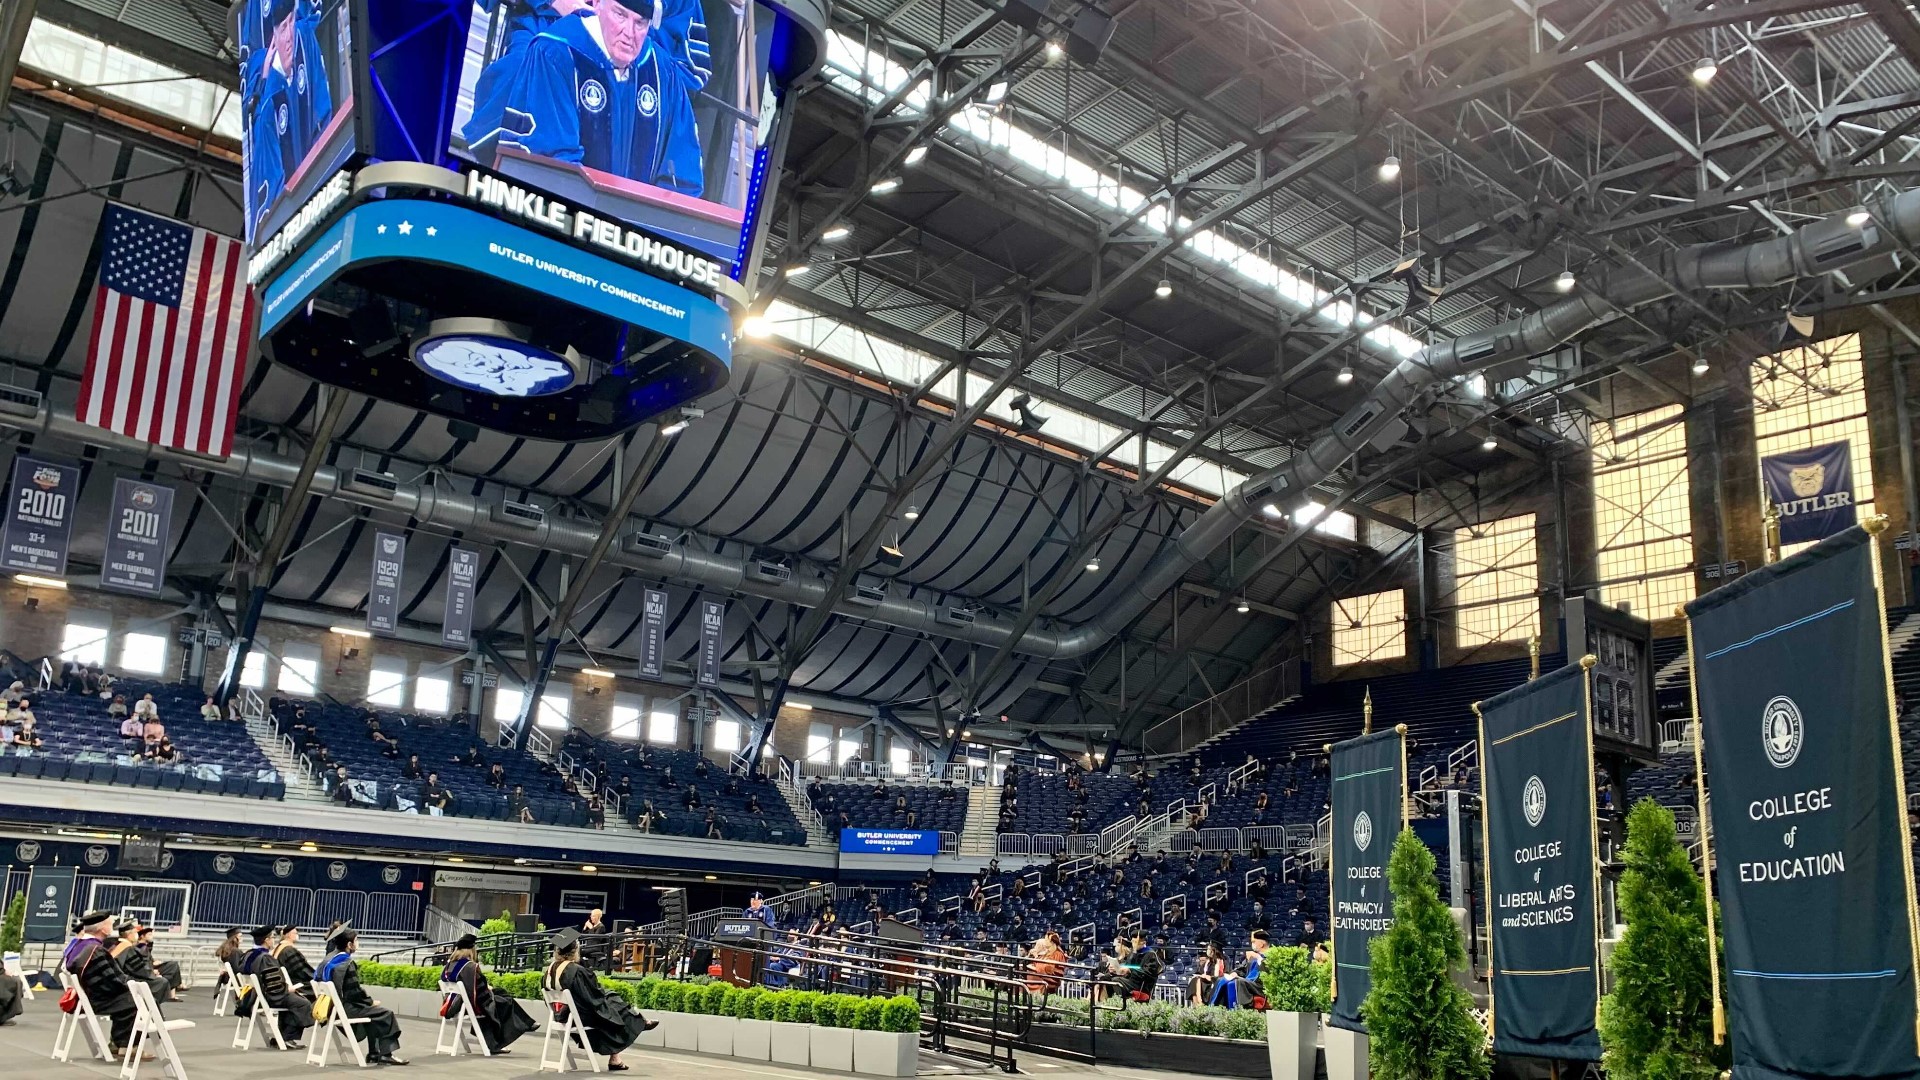 Butler University was one of many holding in-person ceremonies over the weekend.